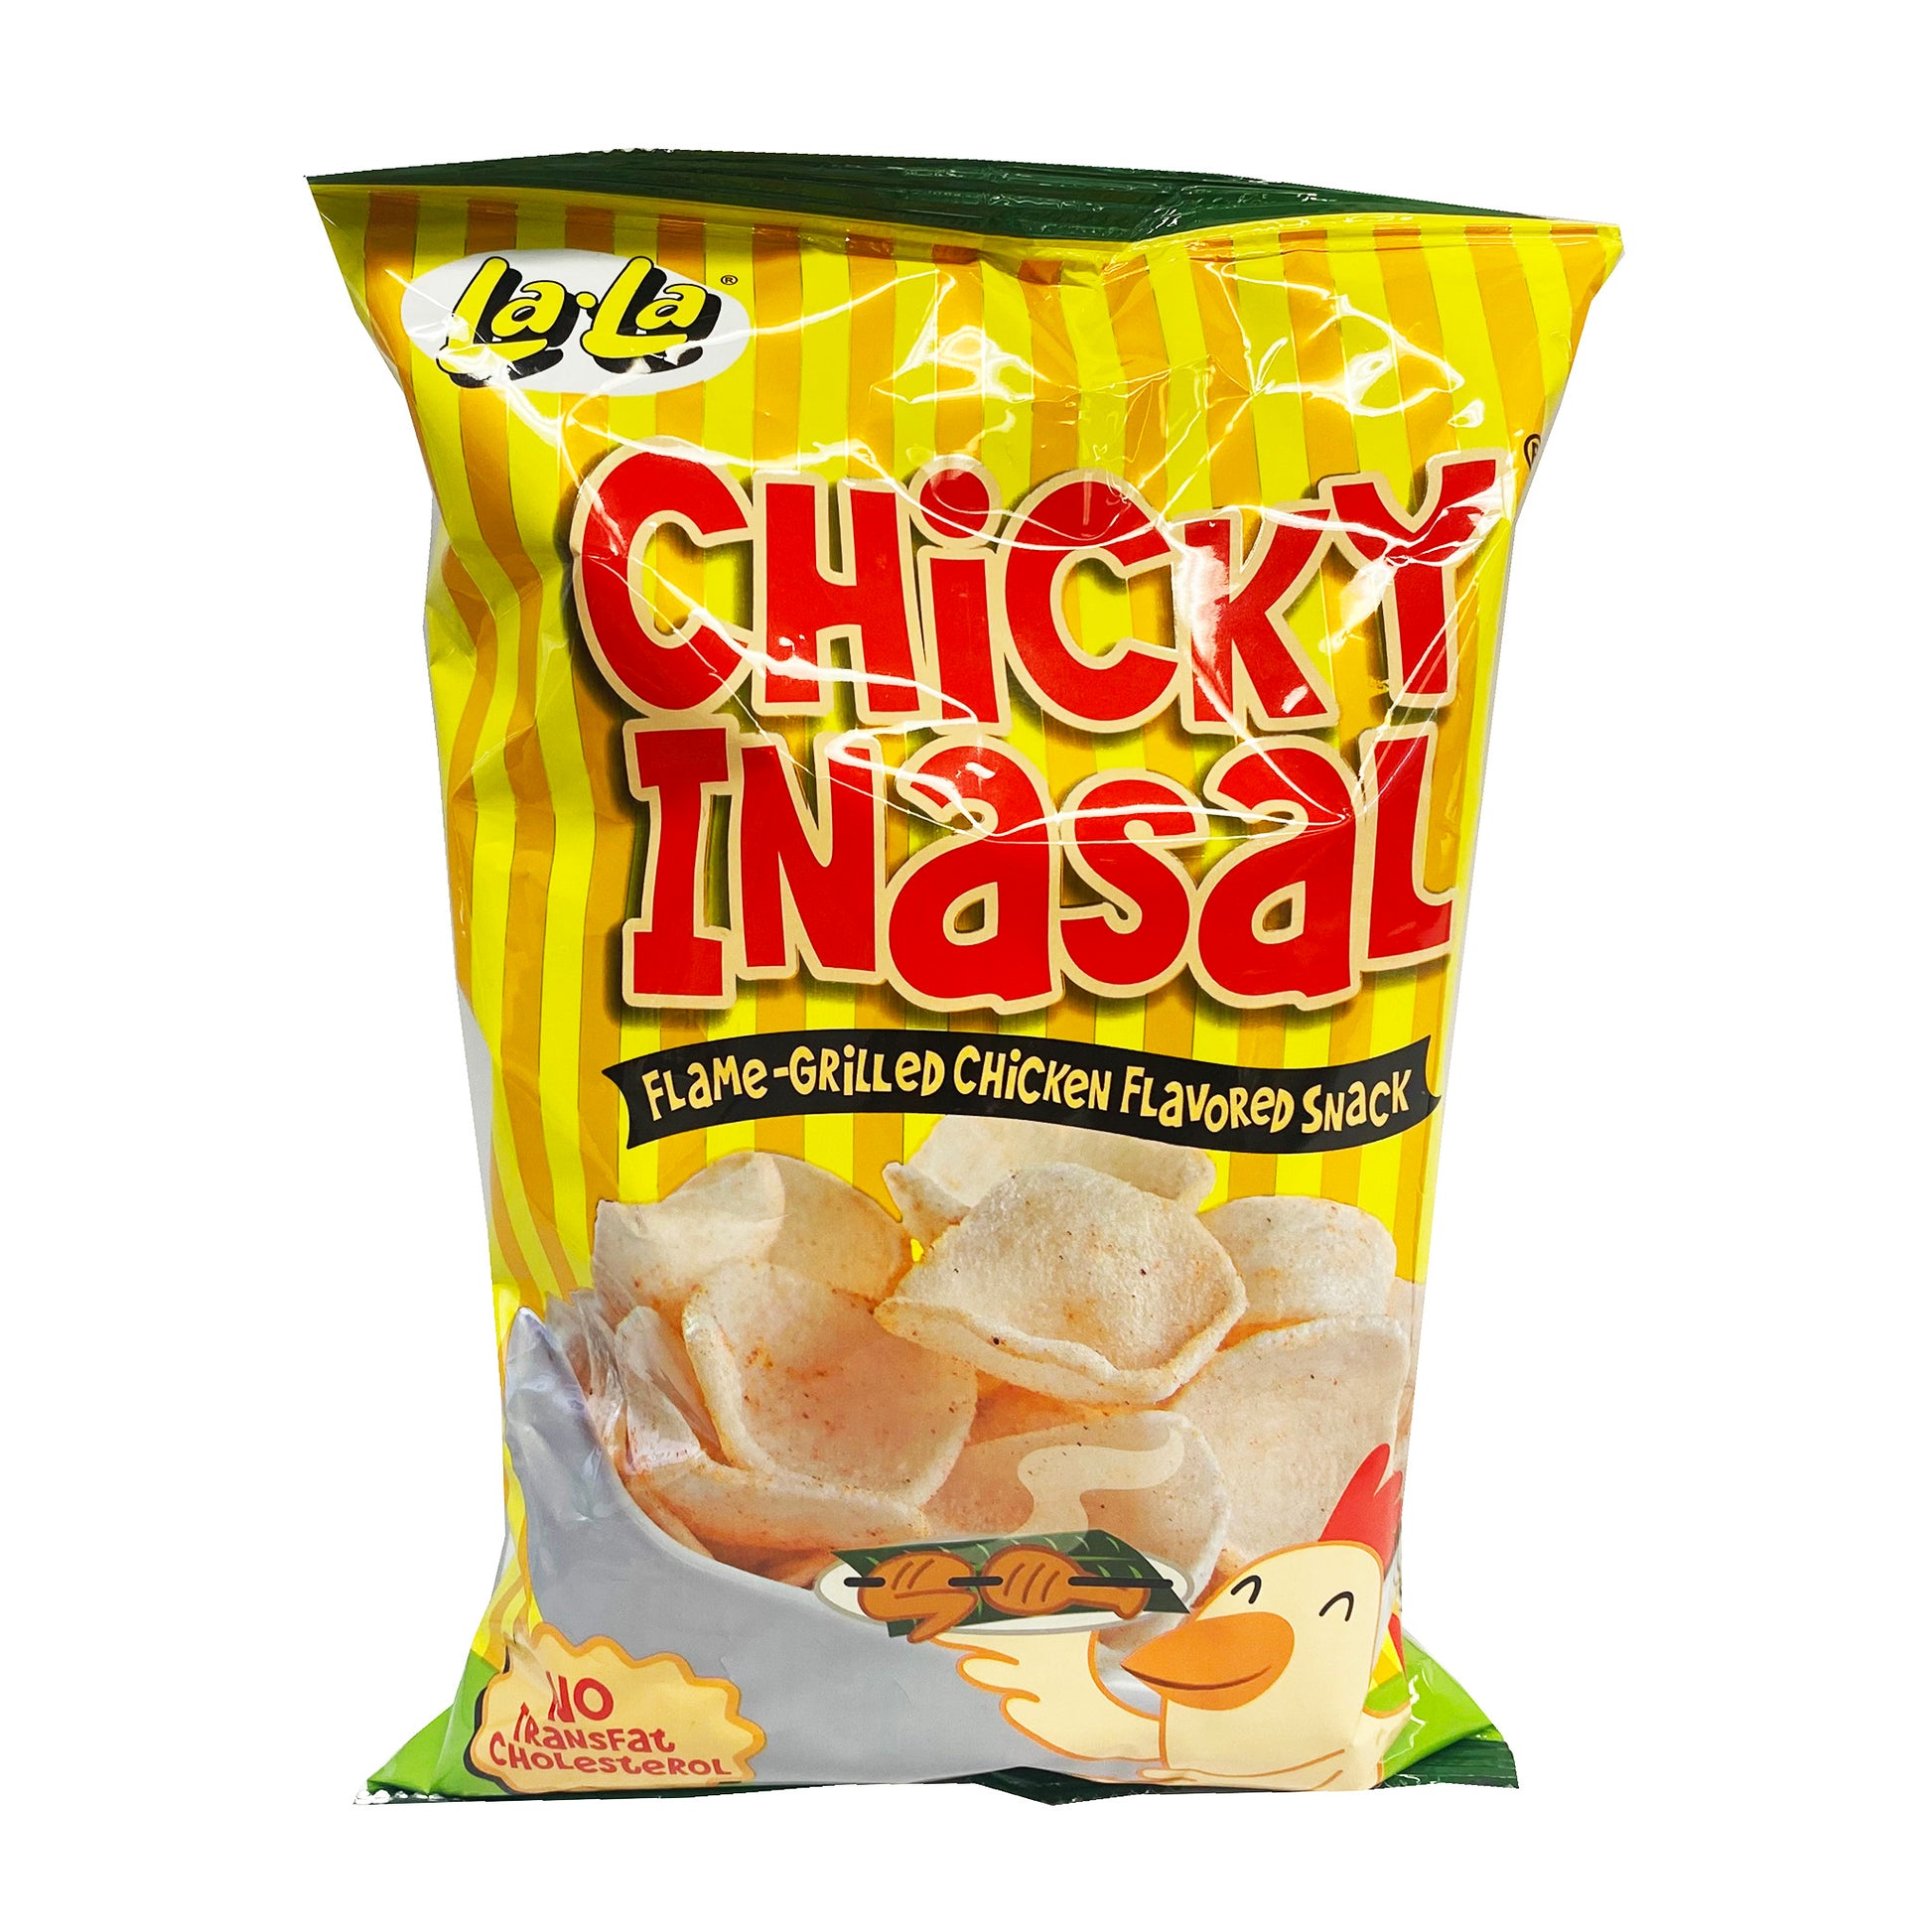 Front graphic image of LaLa Chicky Chips - Inasal Flavor 3oz